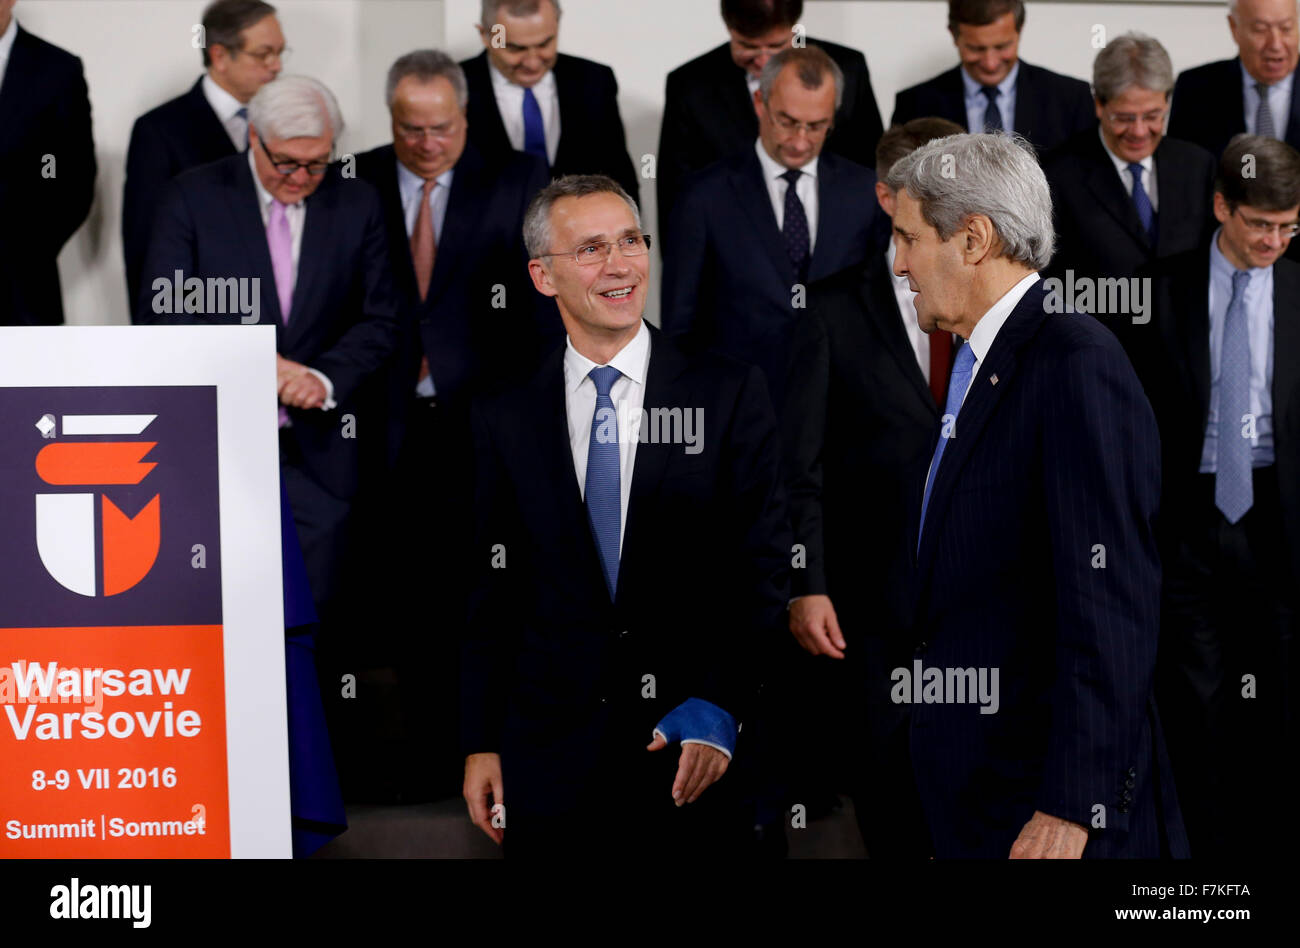 (151201)-- BRUSSELS, Dec. 1, 2015 (Xinhua) -- NATO Secretary General Jens Stoltenberg (L, front) talks with U.S. Secretary of State John Kerry (R, front) as they walk past the logo for the upcoming NATO summit 2016 at a group photo session during NATO foreign ministers meetings at its headquarters in Brussels, Belgium, Dec. 1, 2015. (Xinhua/Ye Pingfan) Stock Photo